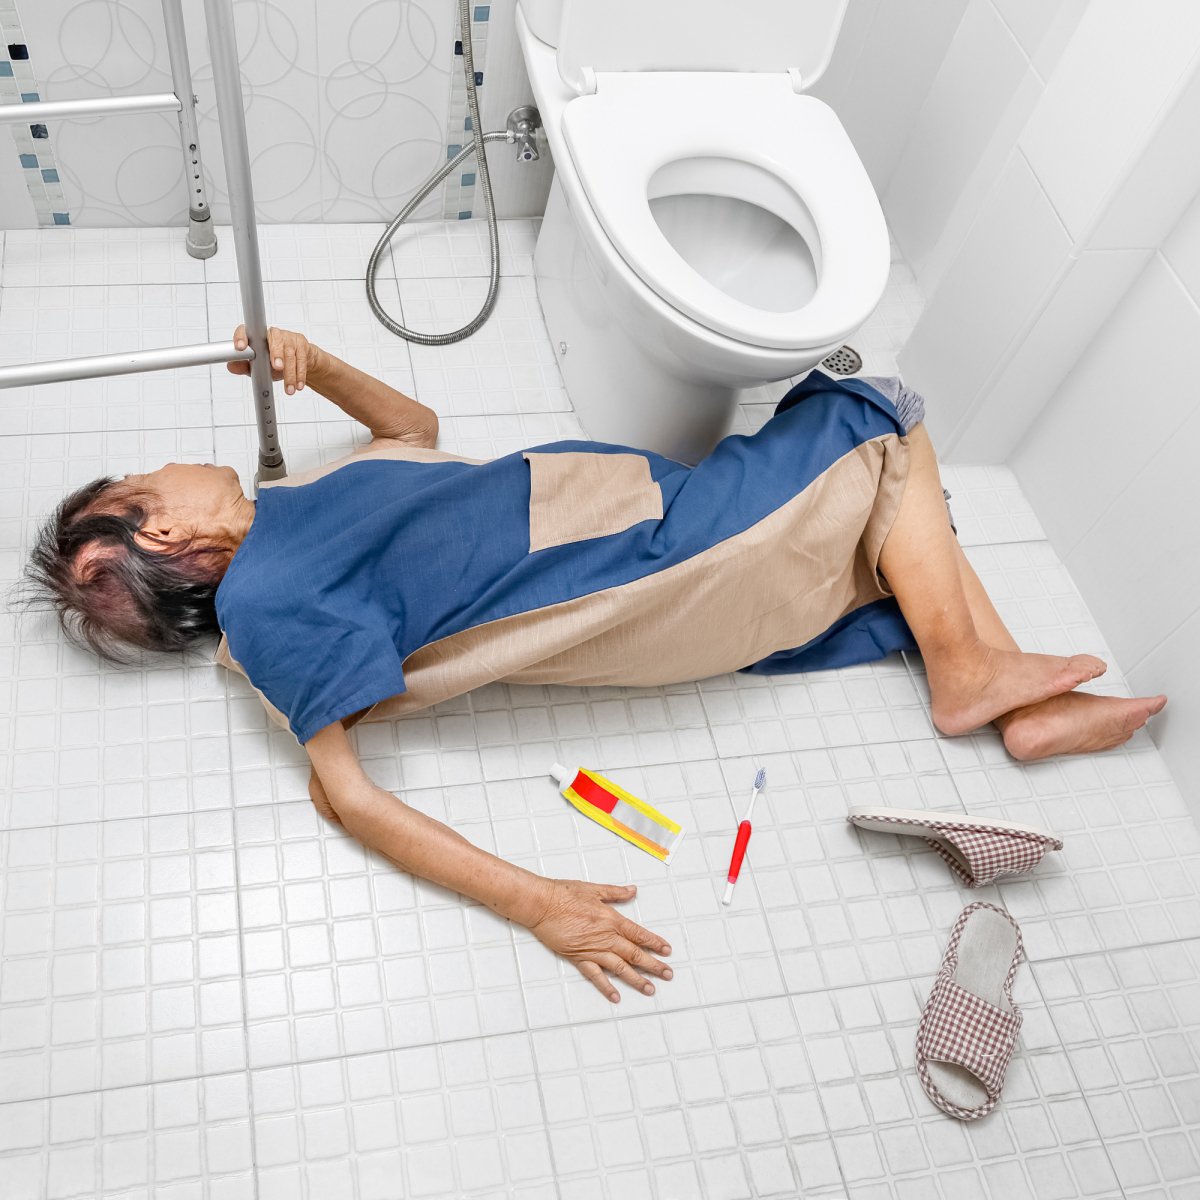 Top Causes of Injuries Among the Elderly: Bathroom Slip and Fall Incidents - Slips Away